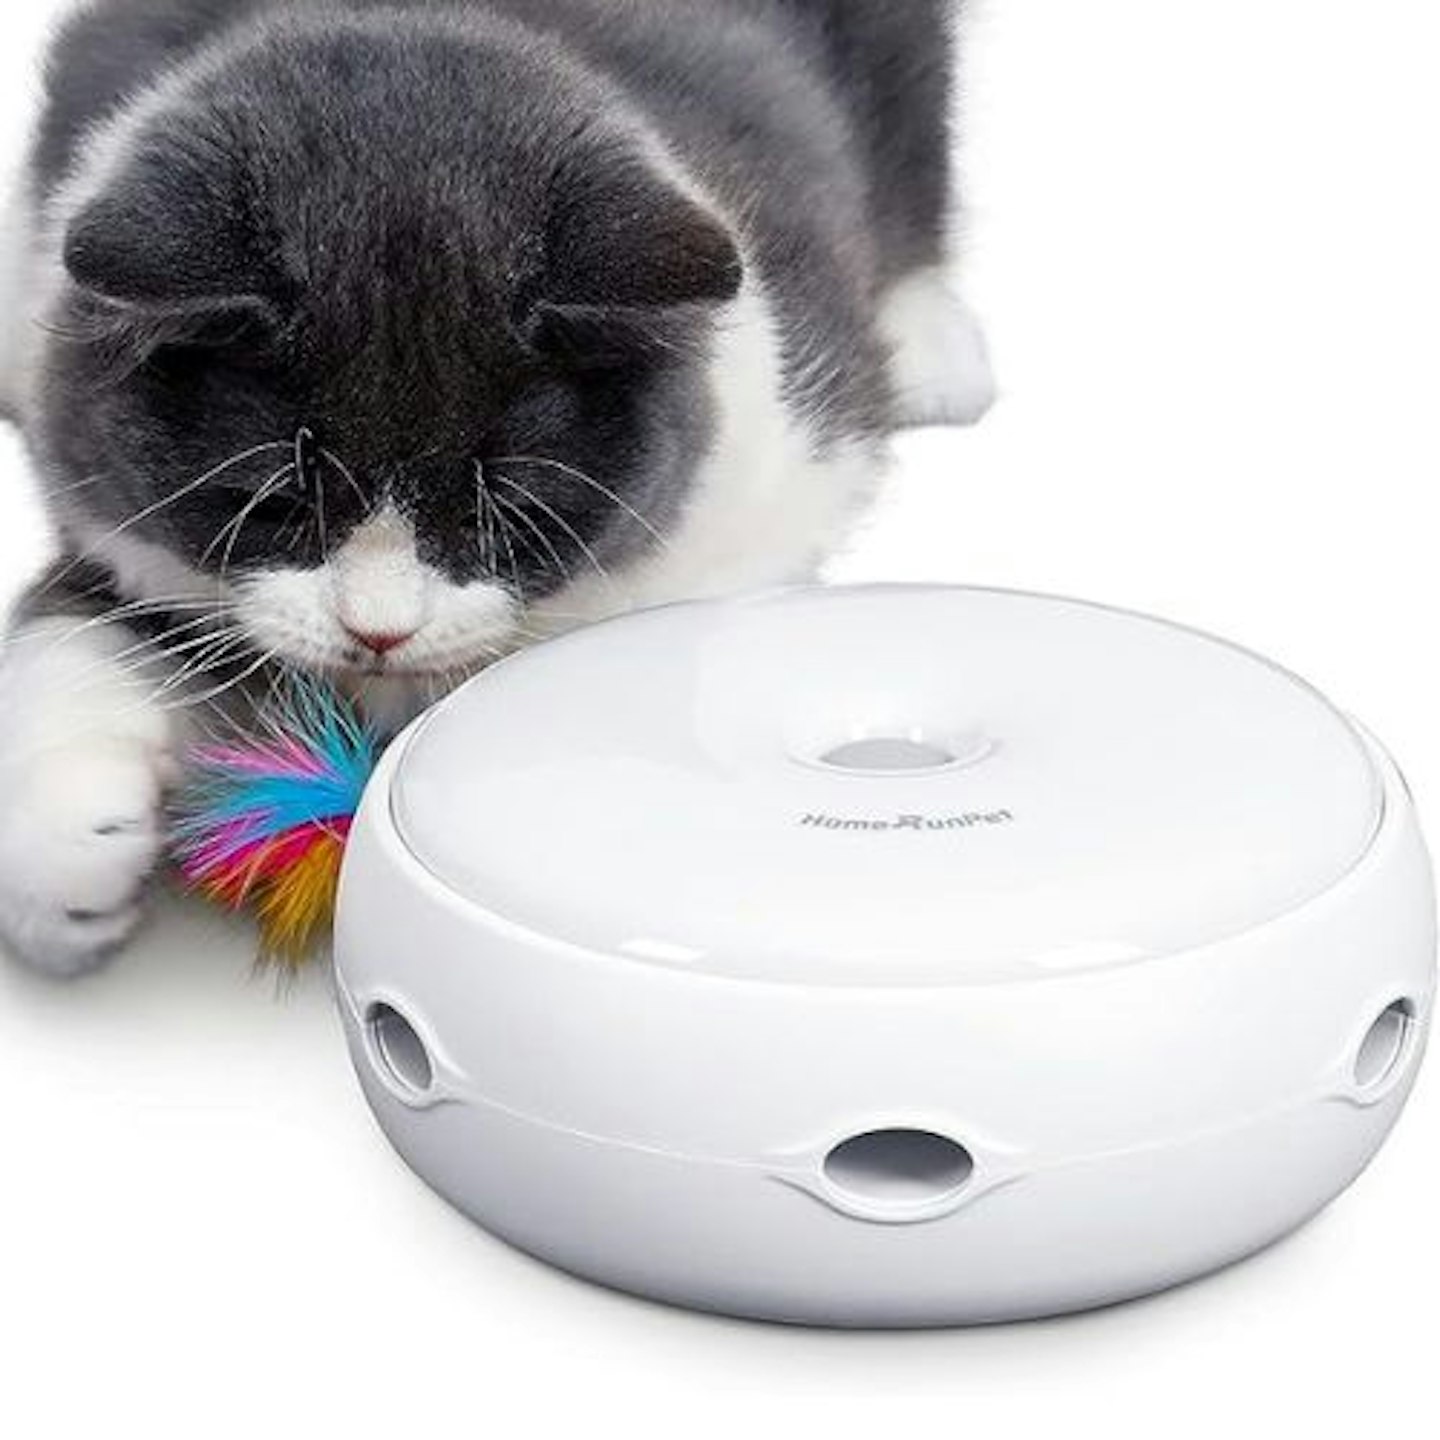 Best Interactive Cat Toys To Stimulate